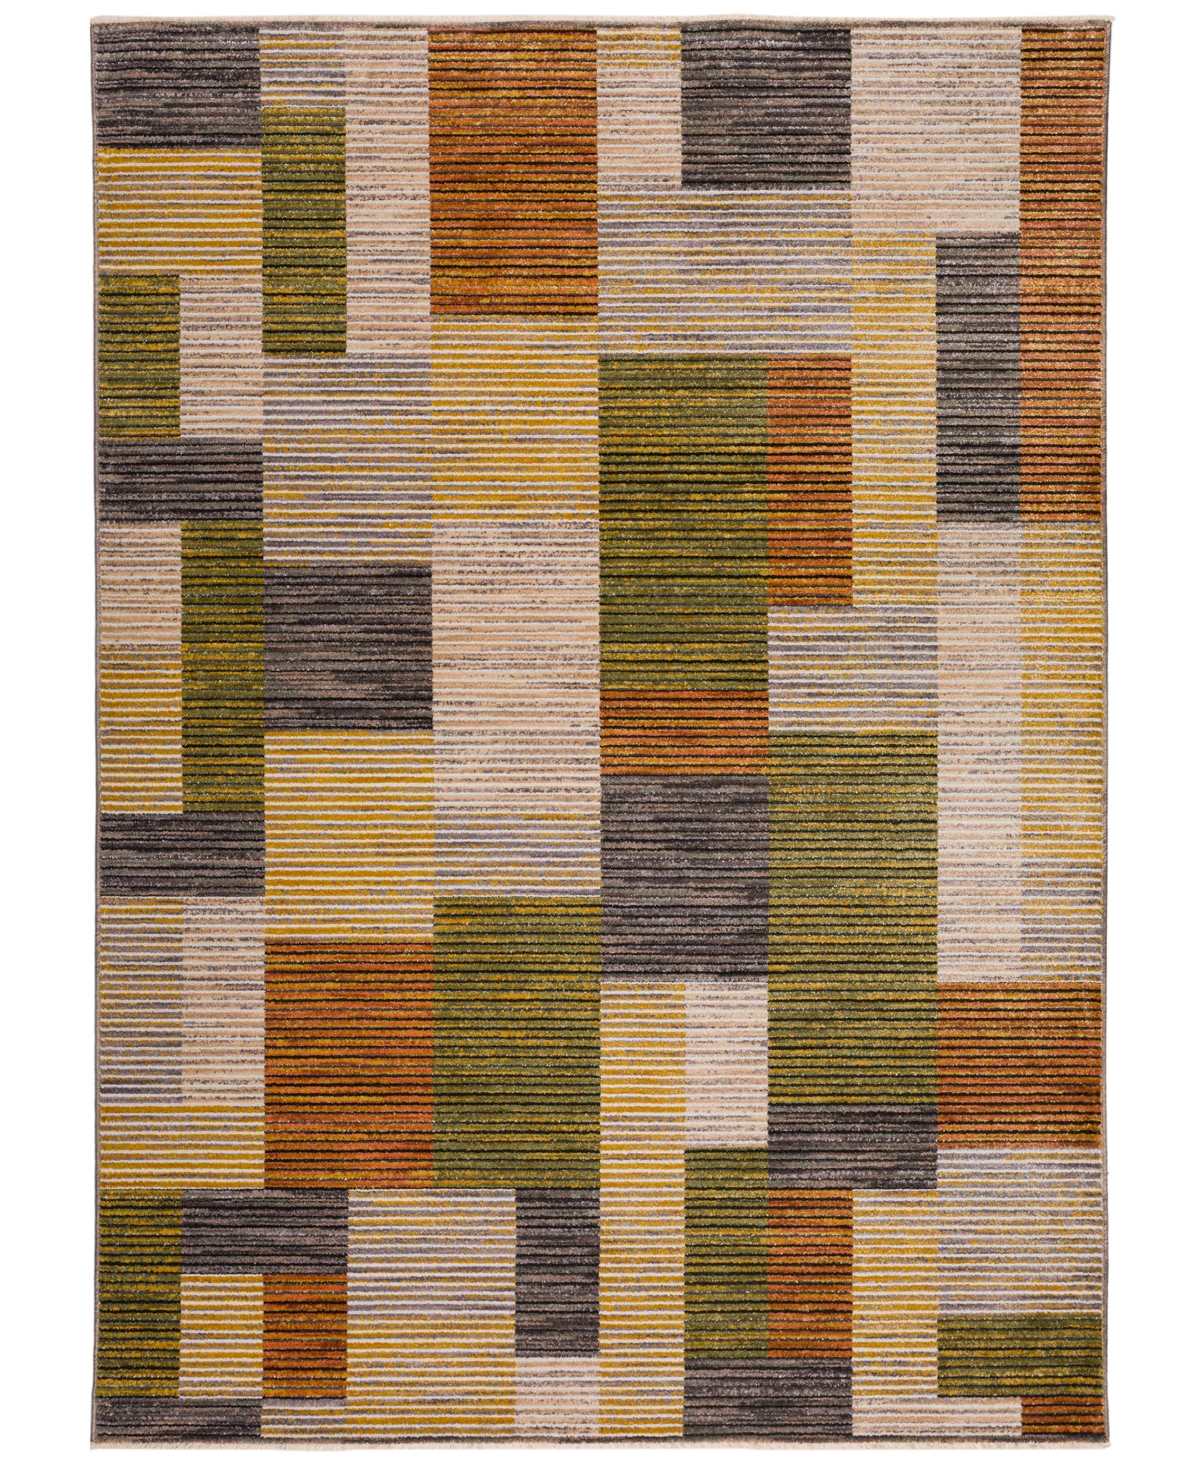 D Style Sergey Sgy5 3' X 5' Area Rug In Multi